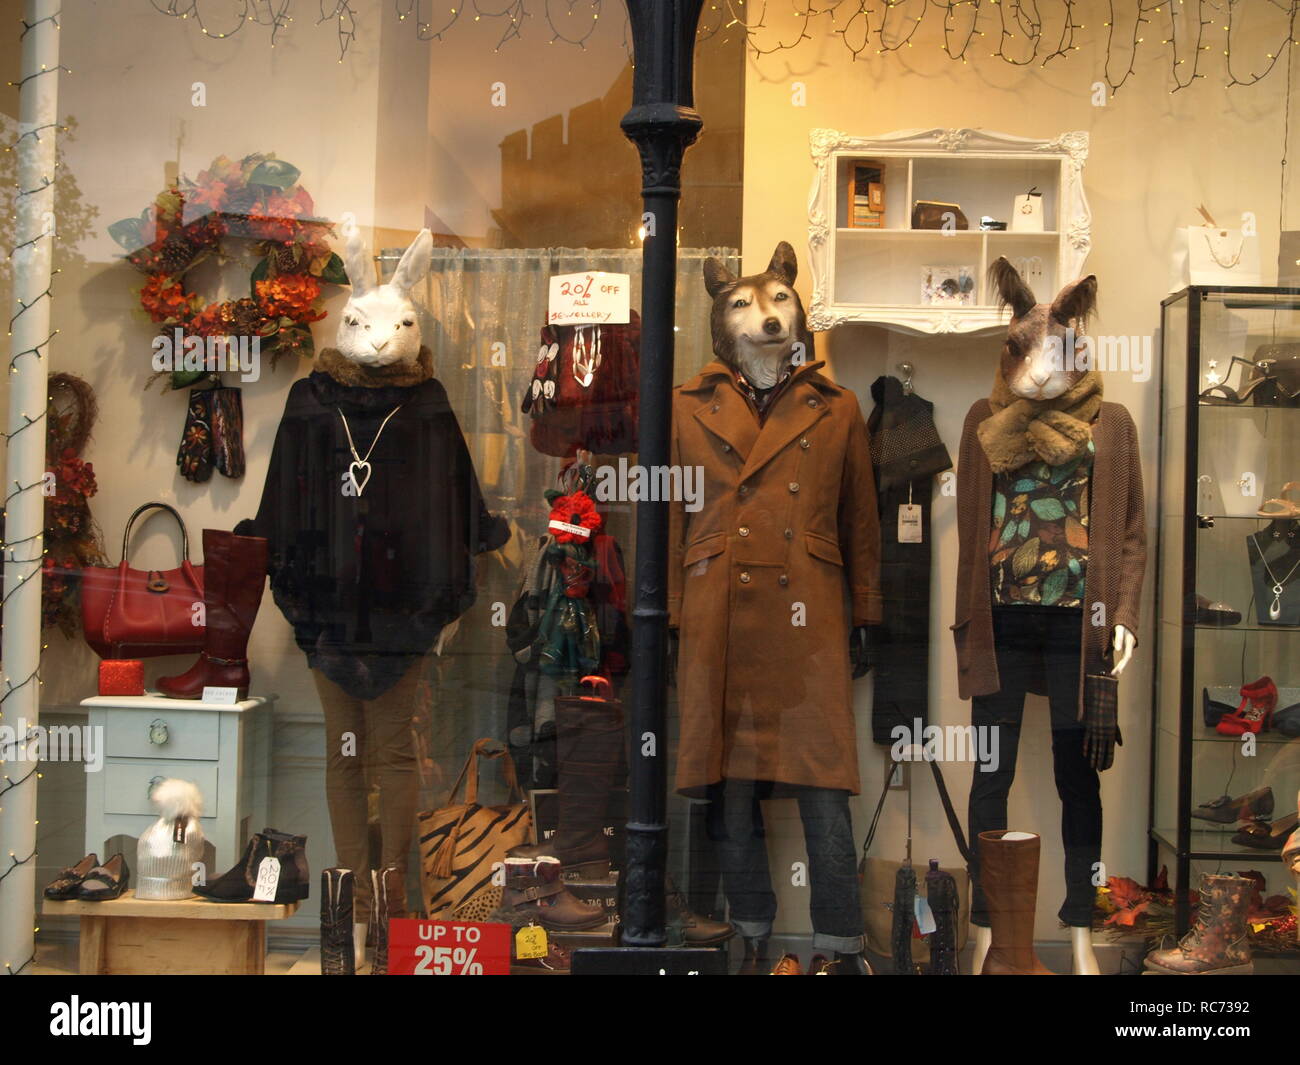 The height of fashion, quirky shop window display, just loved the humour and the style Stock Photo